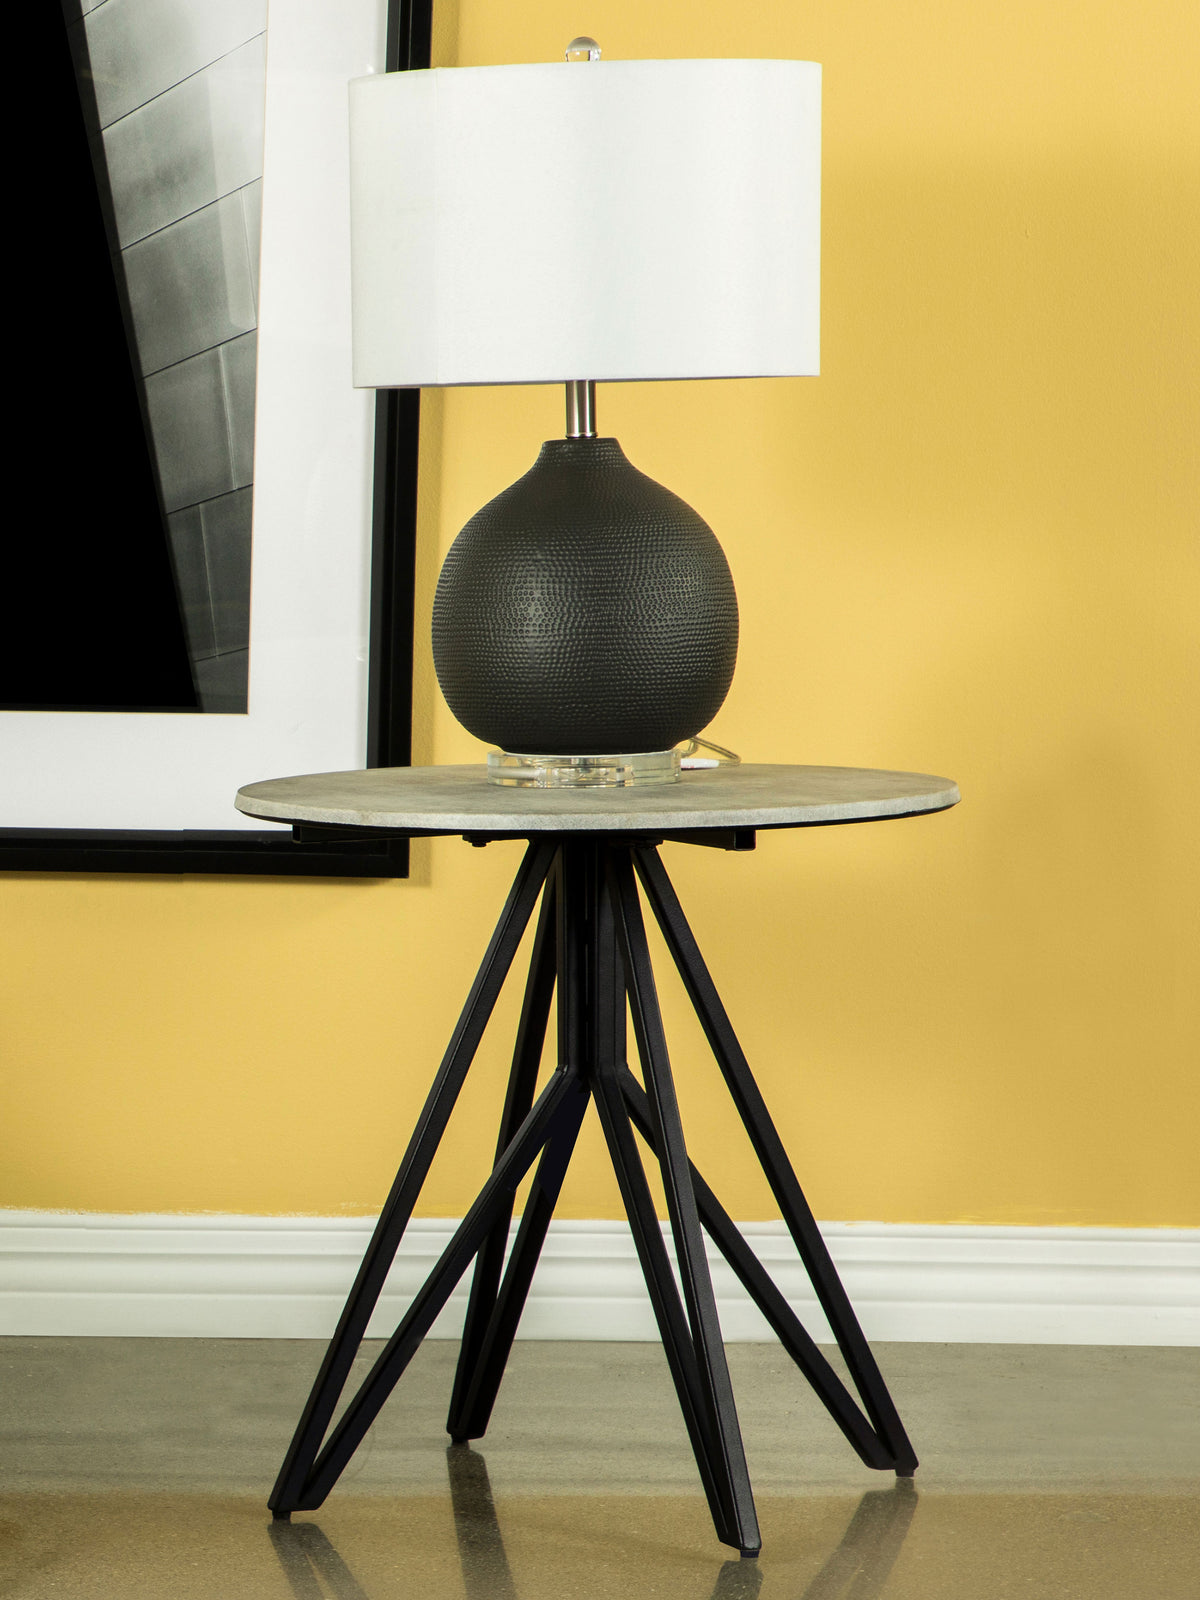 Hadi Round End Table with Hairpin Legs Cement and Gunmetal Hadi Round End Table with Hairpin Legs Cement and Gunmetal Half Price Furniture